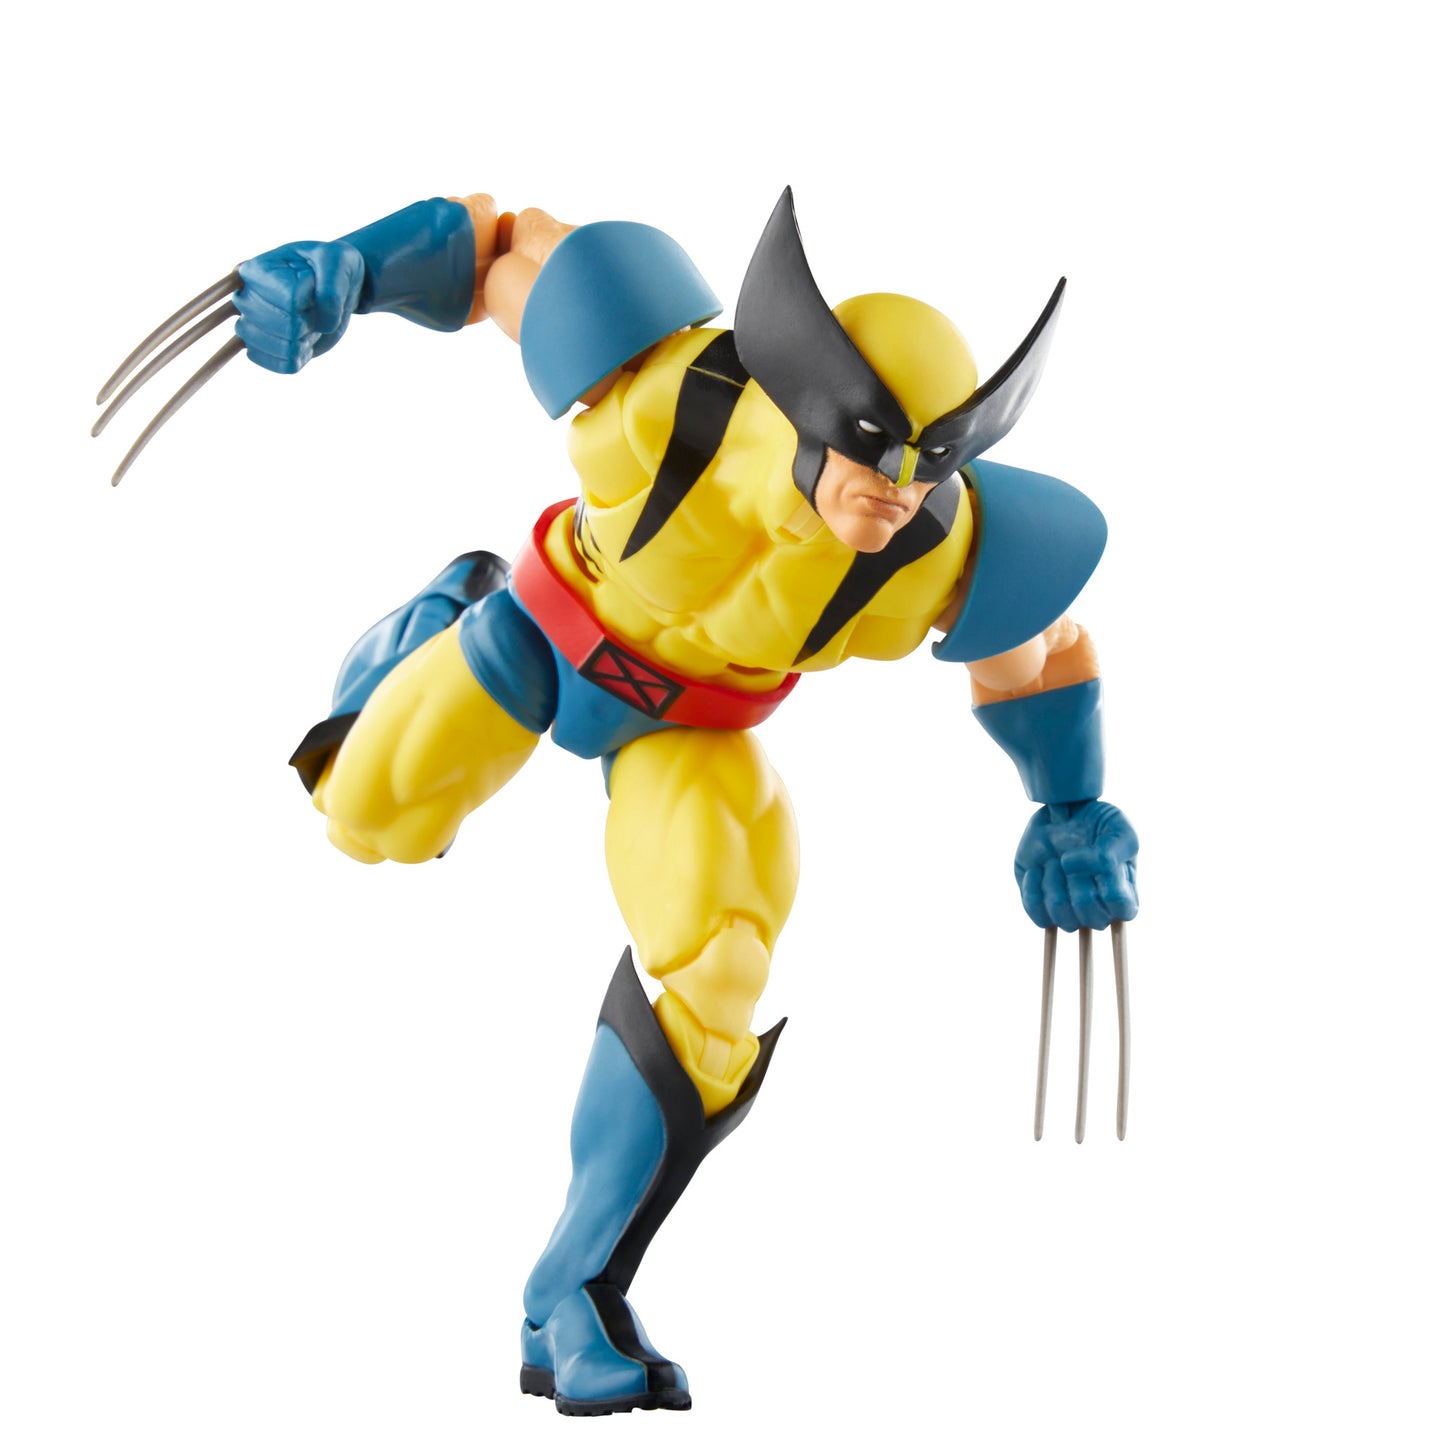 Hasbro Marvel Legends Series Wolverine Action Figure Toy attacking pose 2 - Heretoserveyou